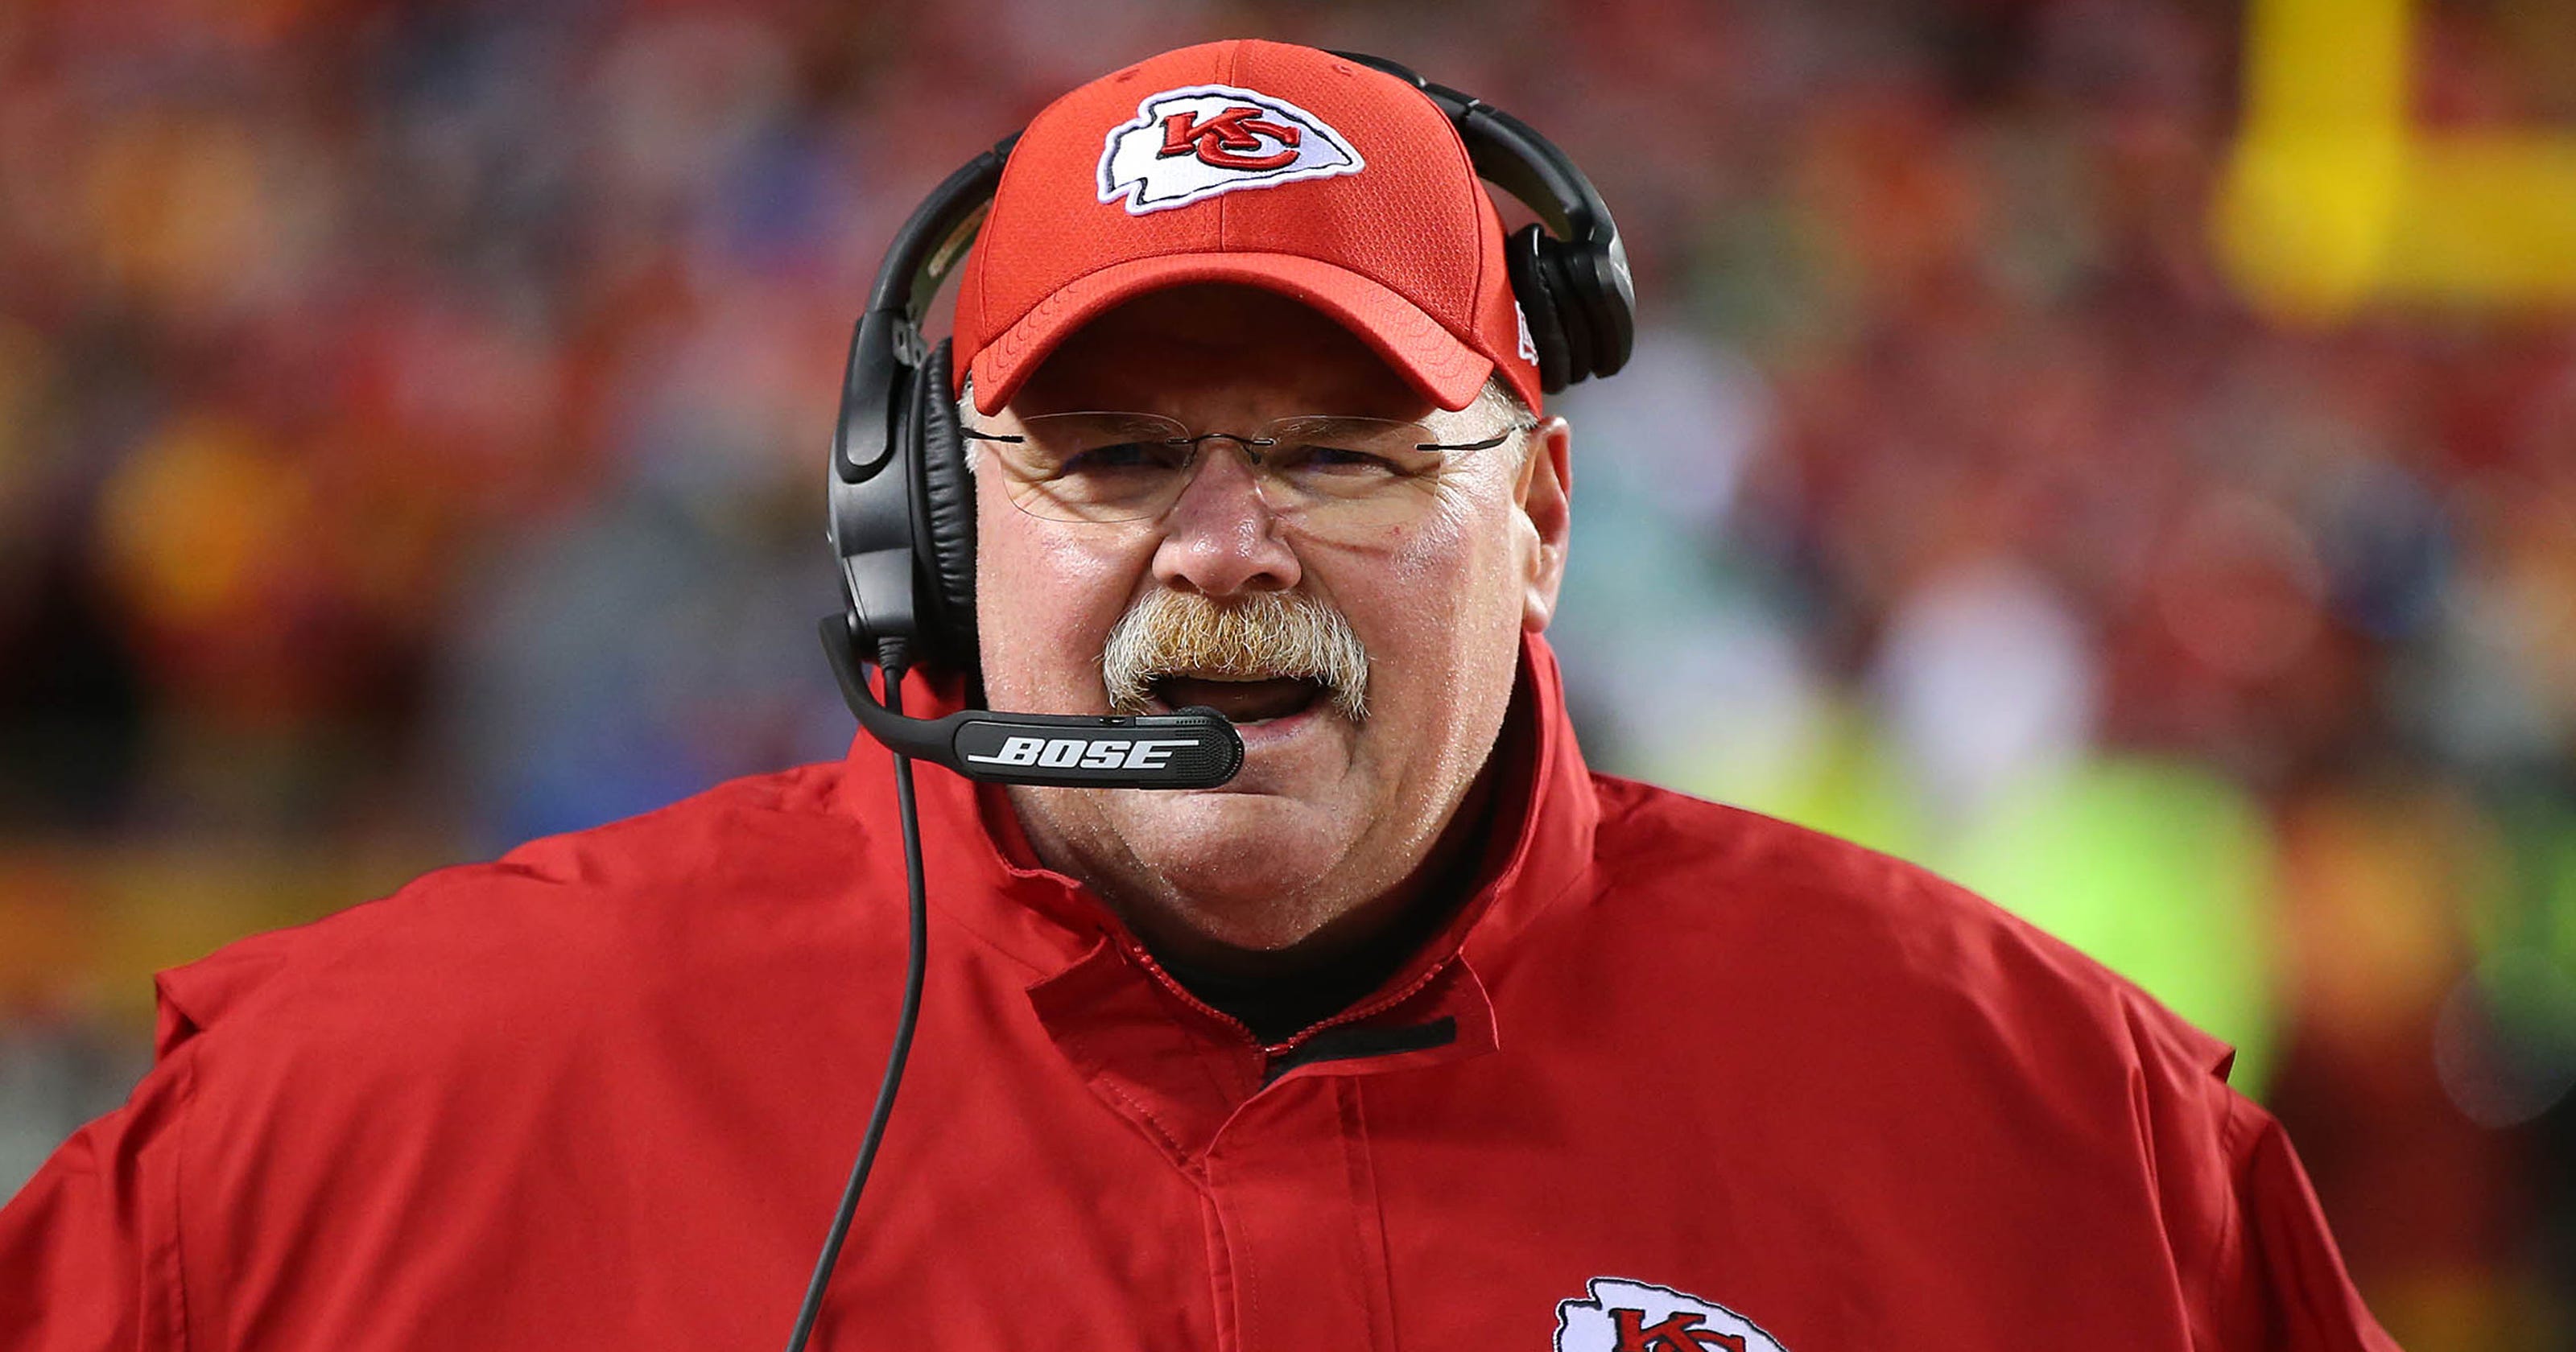 Comments on Chiefs coach Andy Reid get KC radio host pulled off air